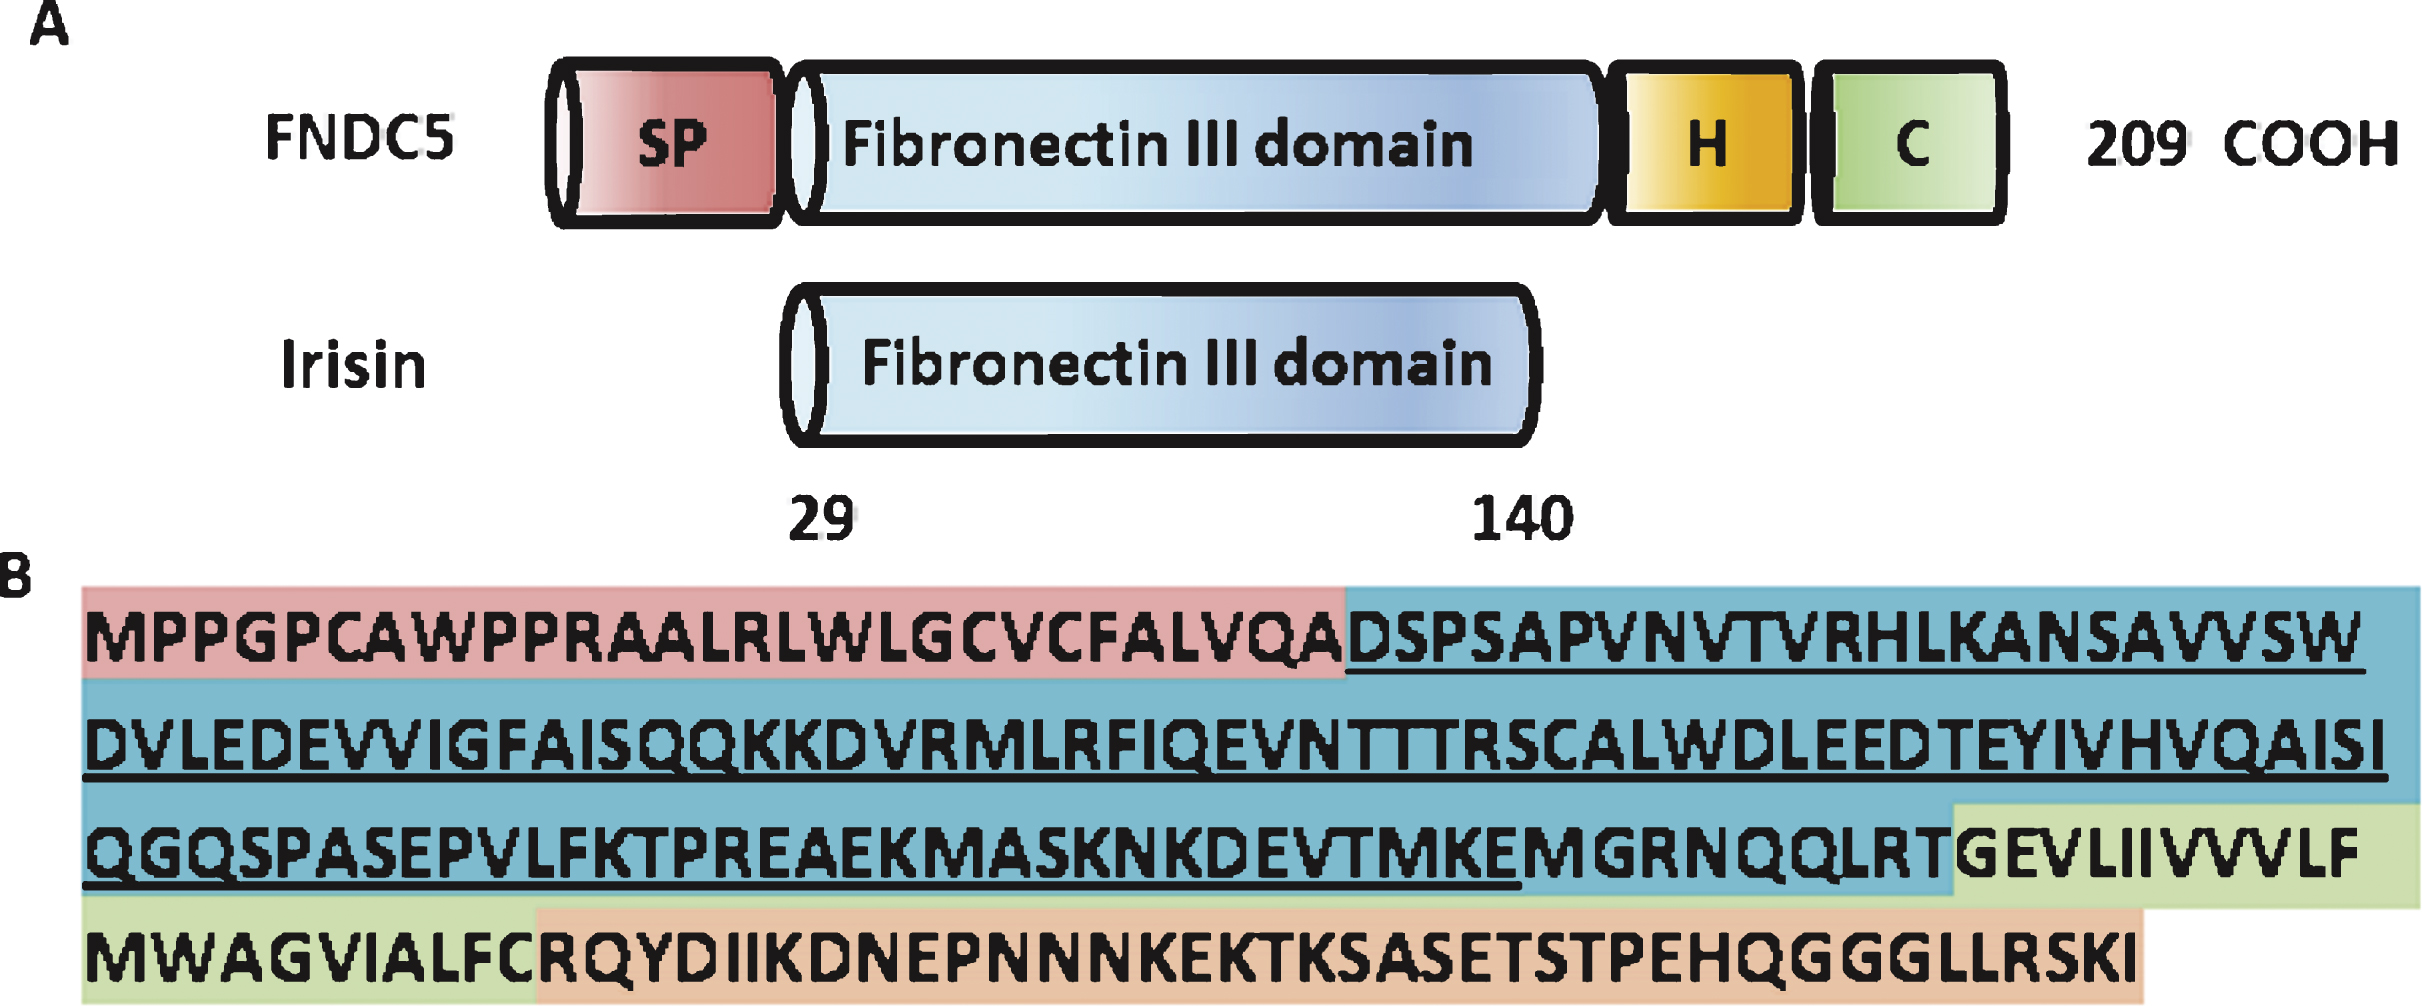 Structure of the murine FNDC% and irisin protein. (A) Scheme of the murine FNDC5 protein structure (top) and murine irisin protein structure (bottom). SP = signal peptide, H = hydrophobic domain, C = cytoplasmic domain. (B) Murine FNDC5 amino acid sequence with corresponding domains colored. The irisin sequence is underlined.